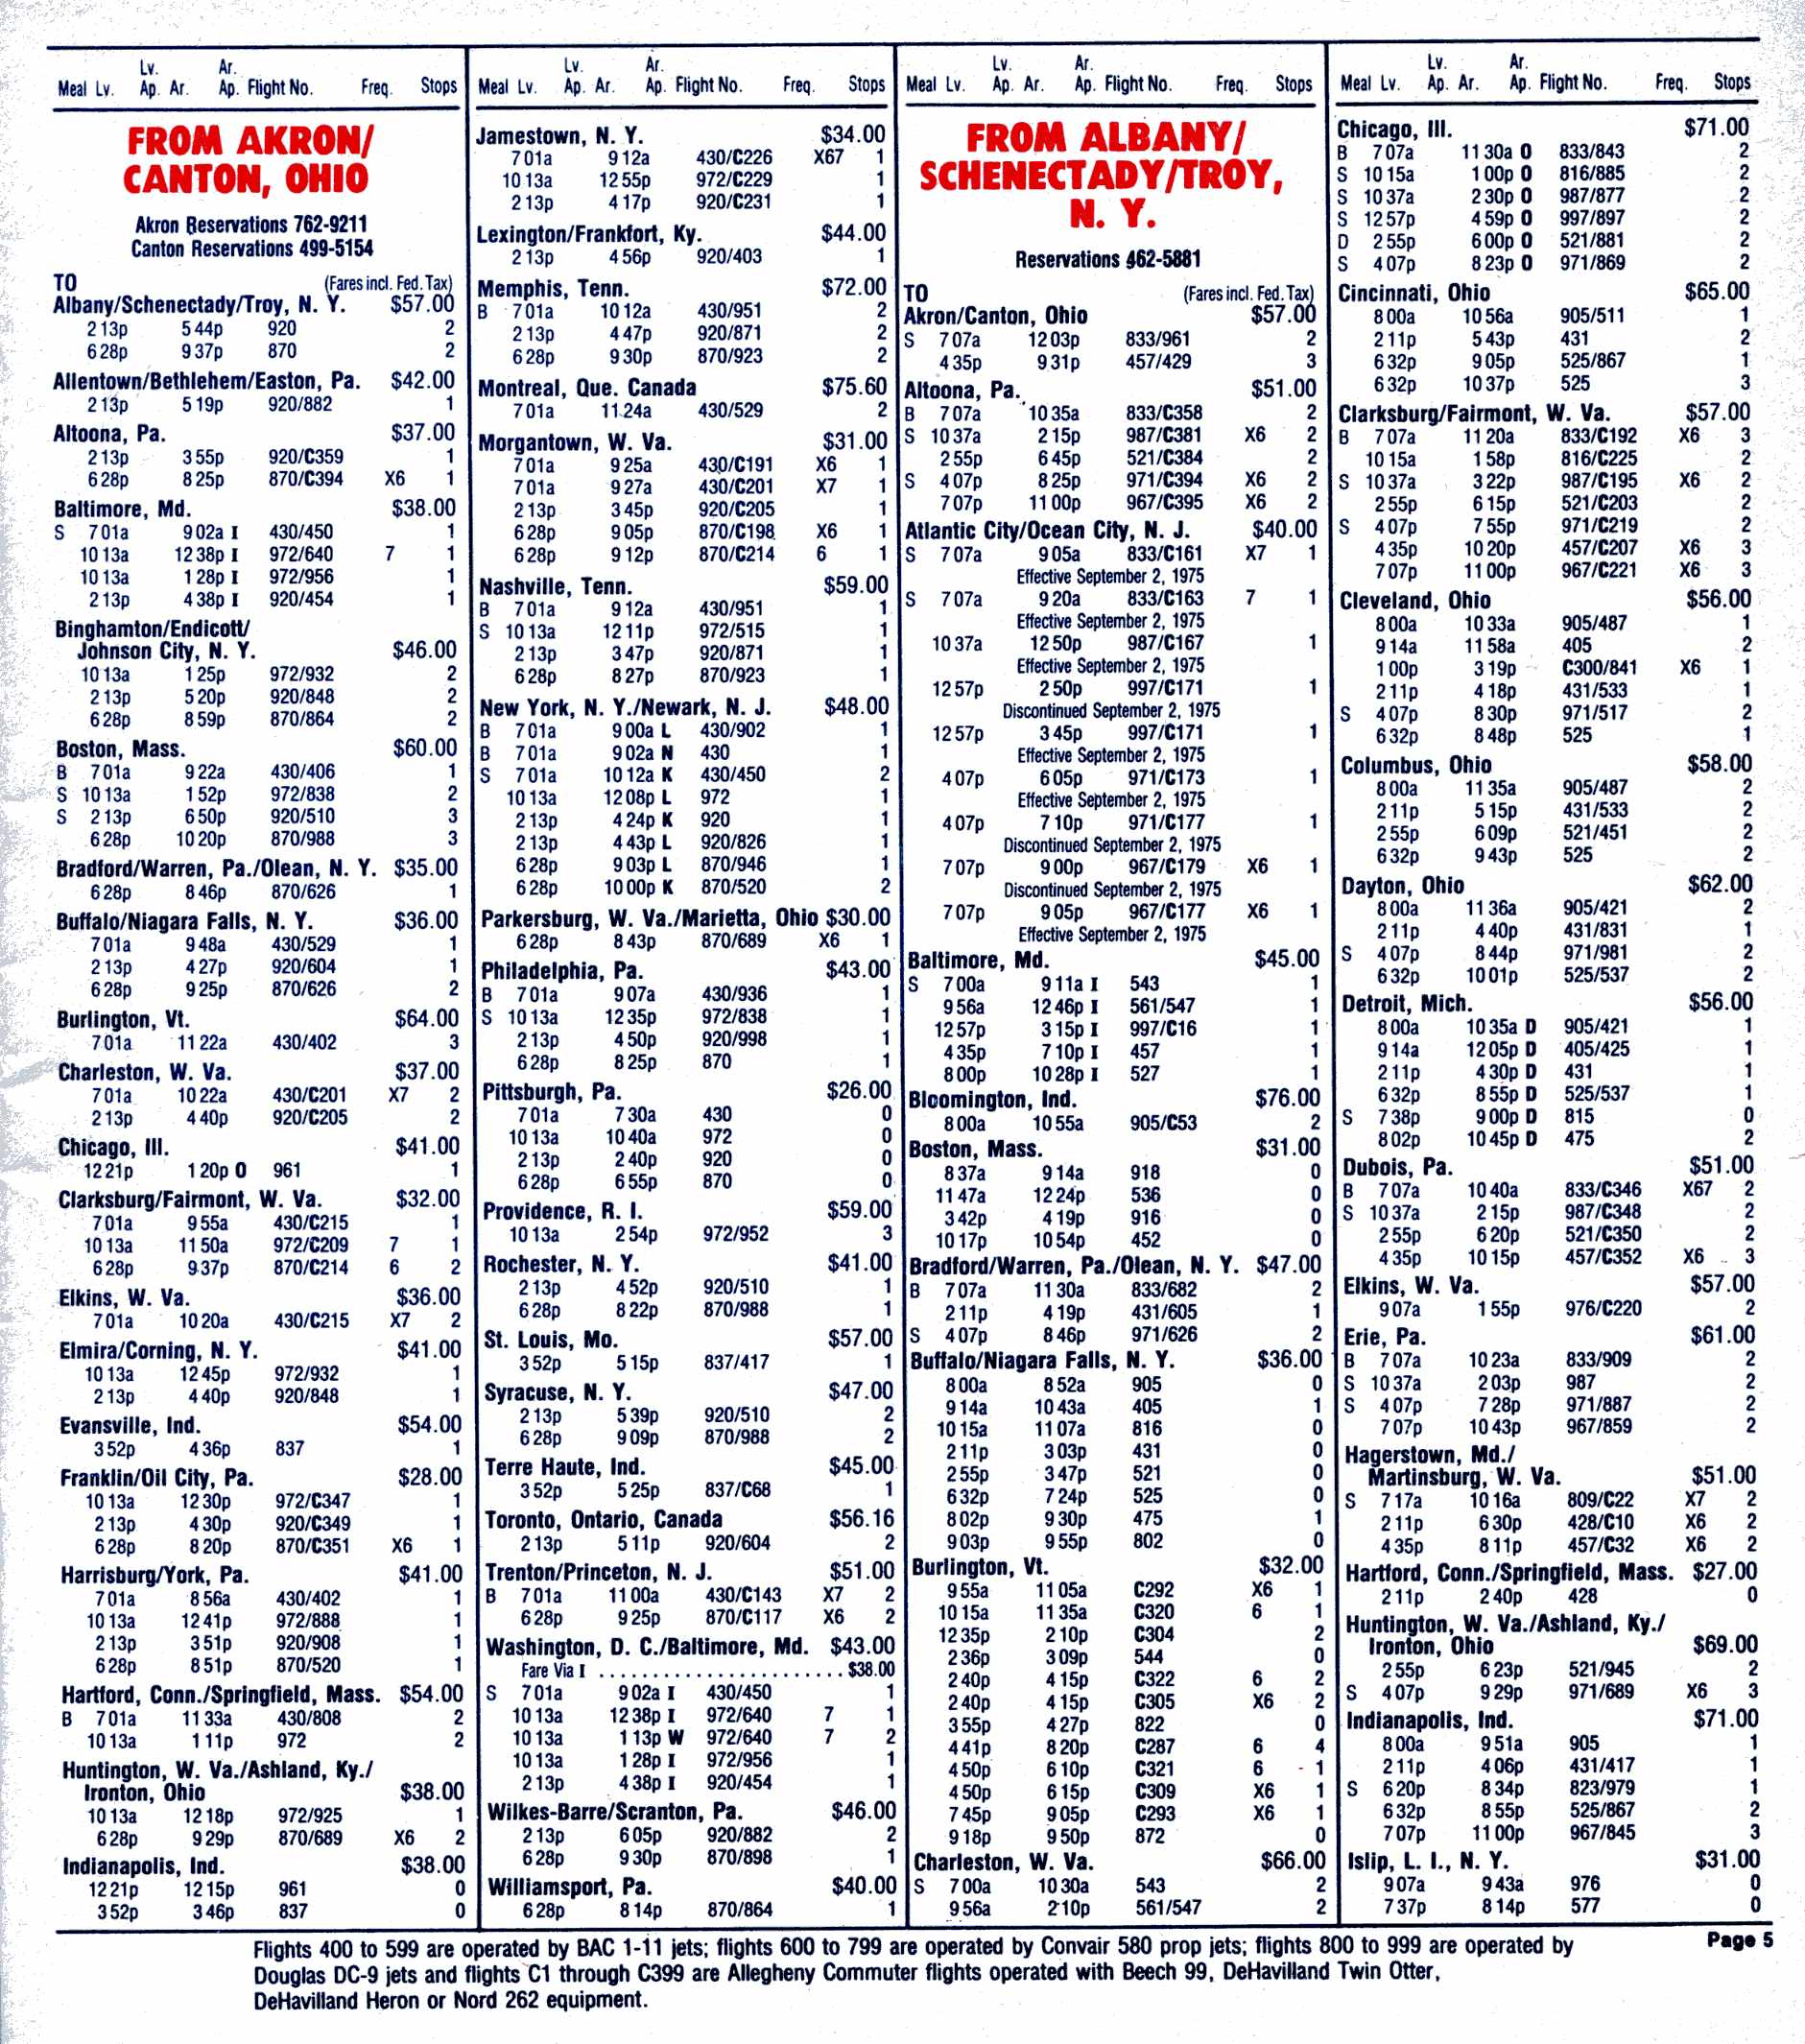 Allegheny Airlines timetable 1975-08-01 02